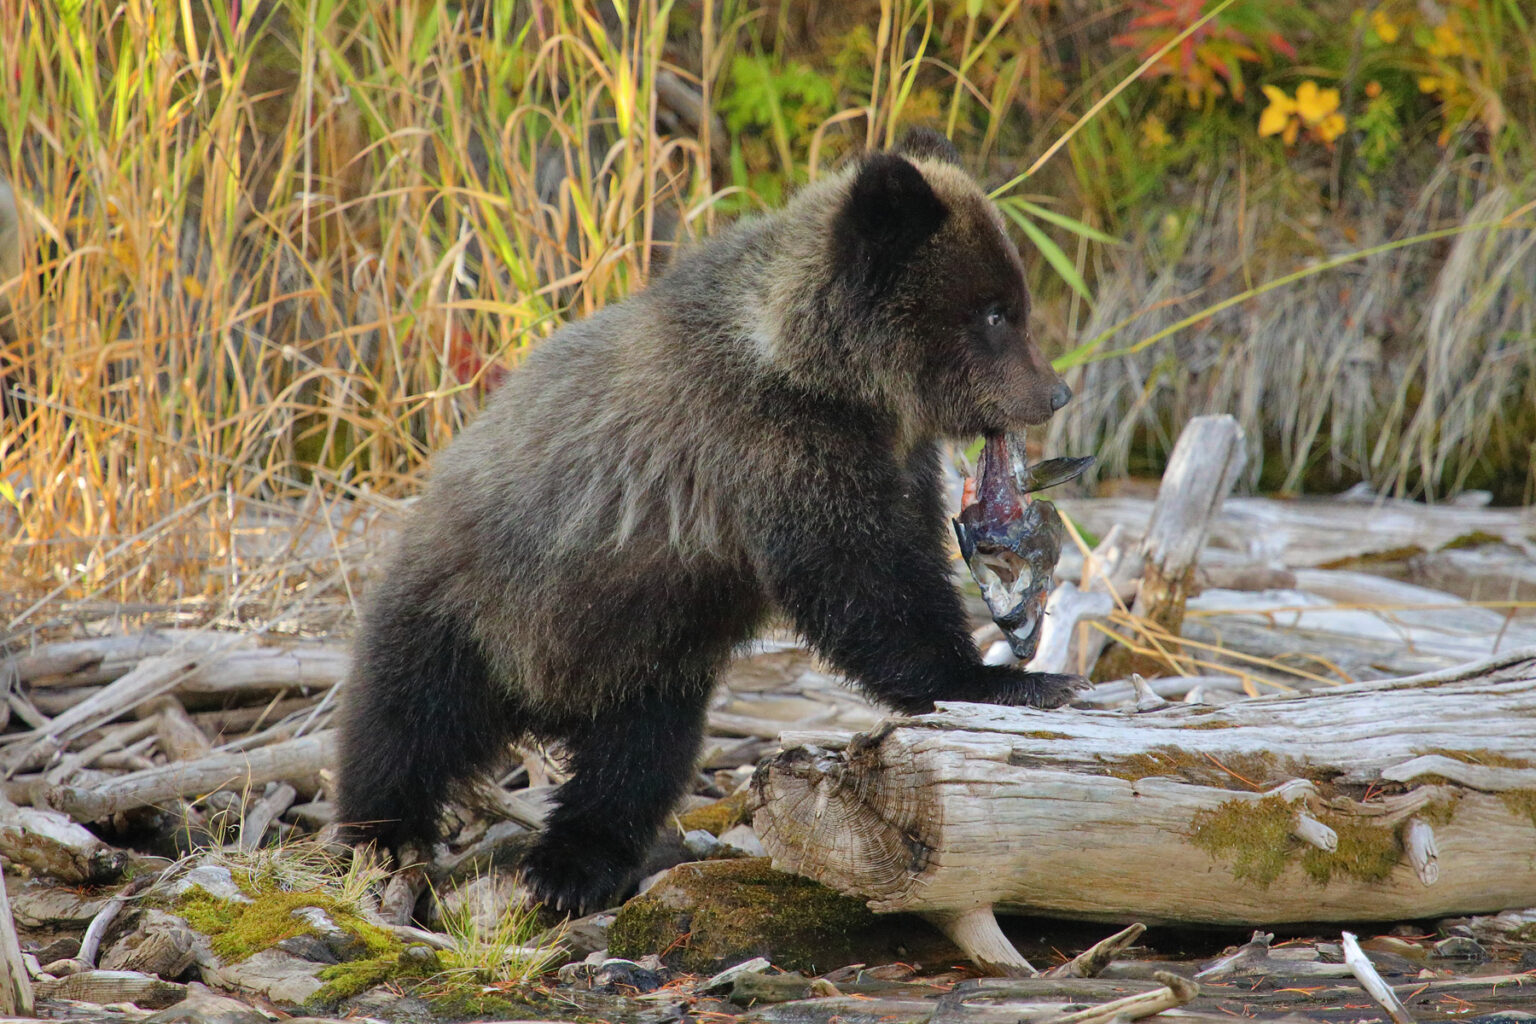 Bear takes the meaning of outdoor dining to the whole new level. Watch how